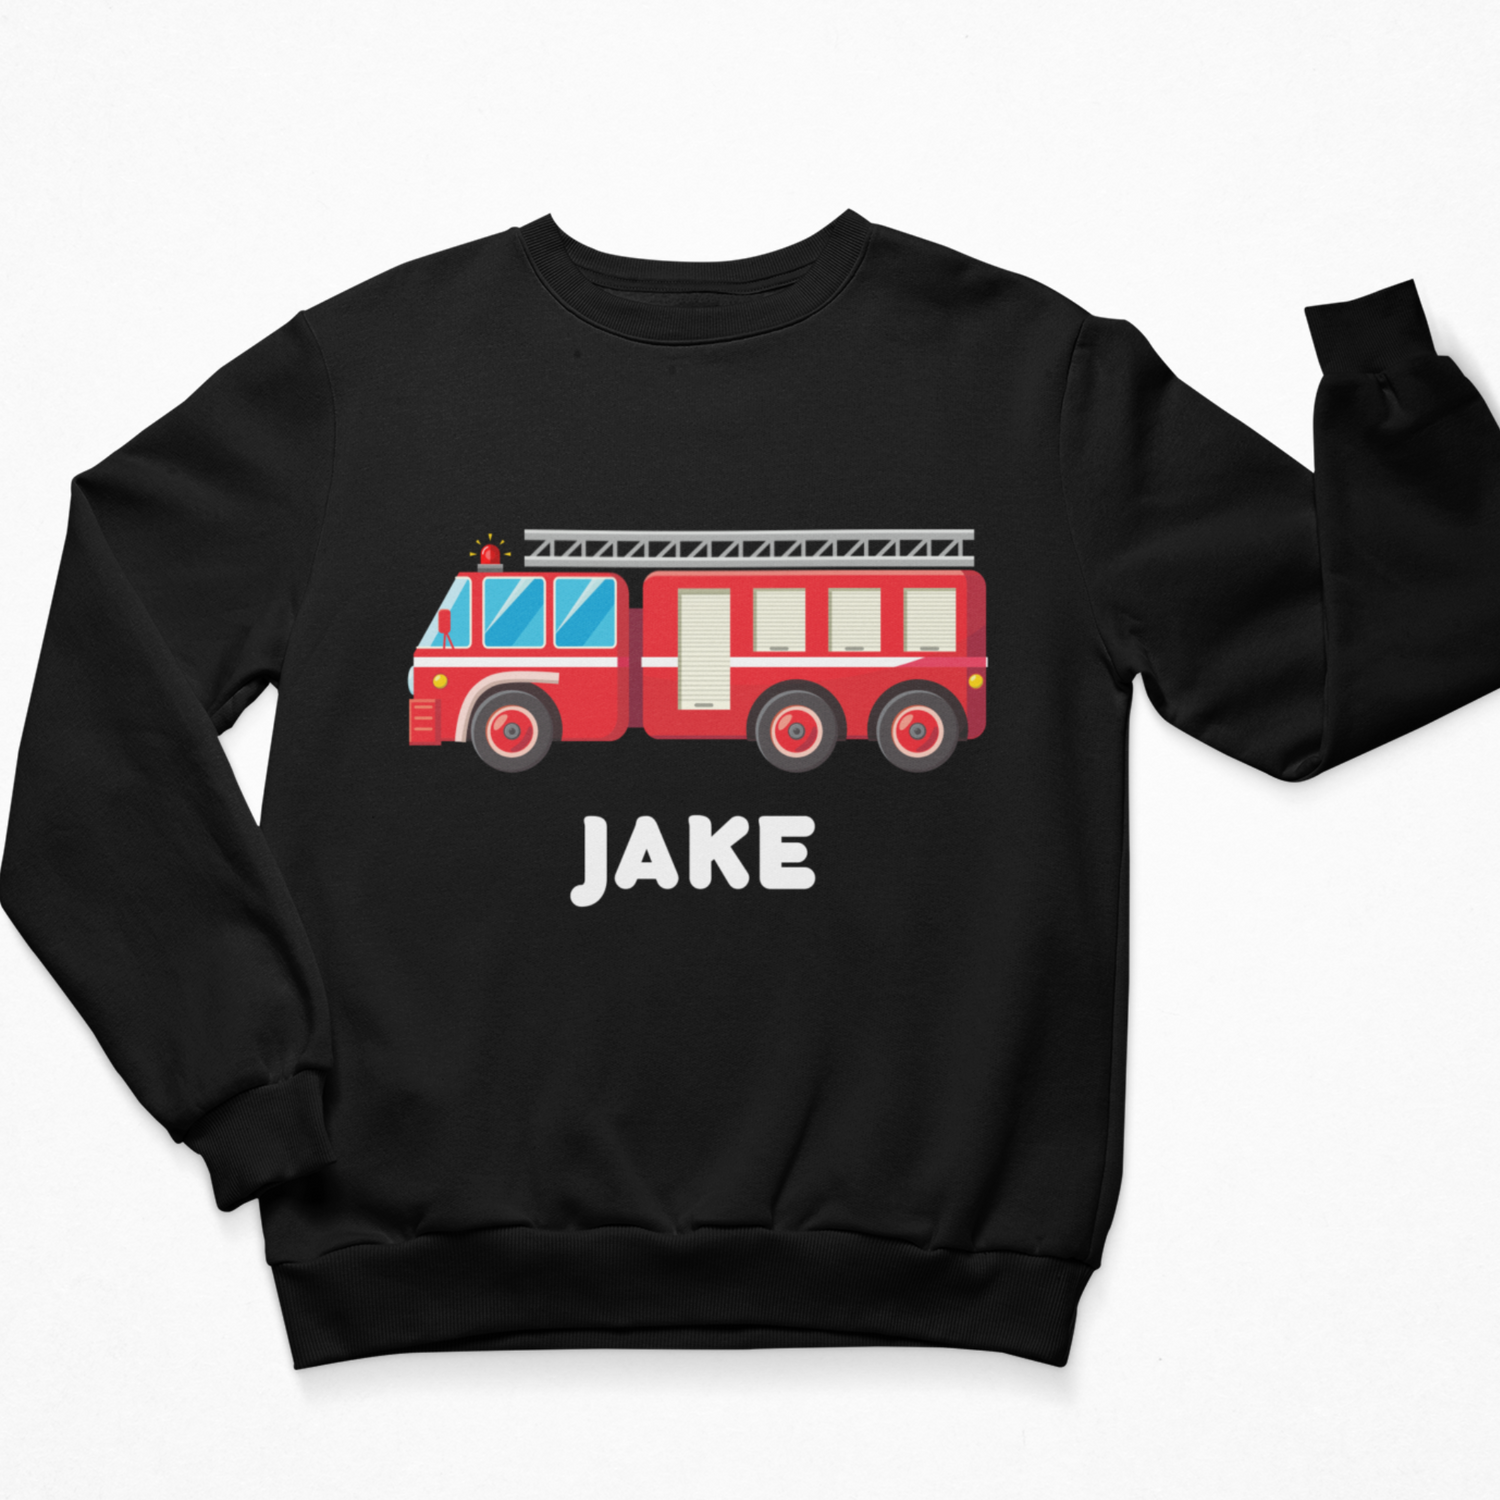 A black sweatshirt with a printed fire engine design and personalised name  in white 